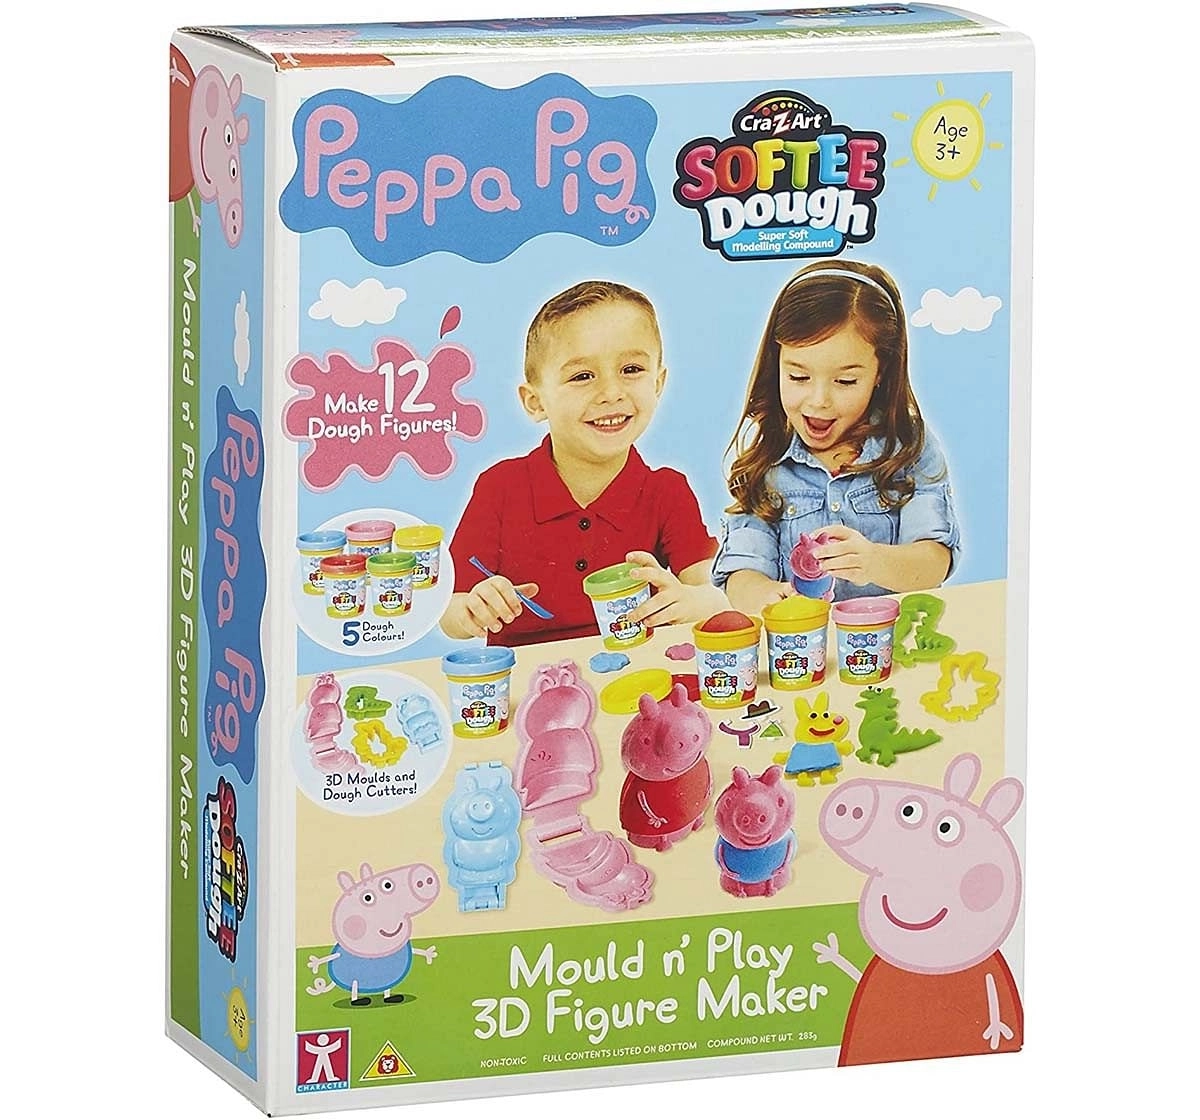 Peppa Pig Softee Dough Small Figure Kit Clay & Dough for Kids Age 3Y+